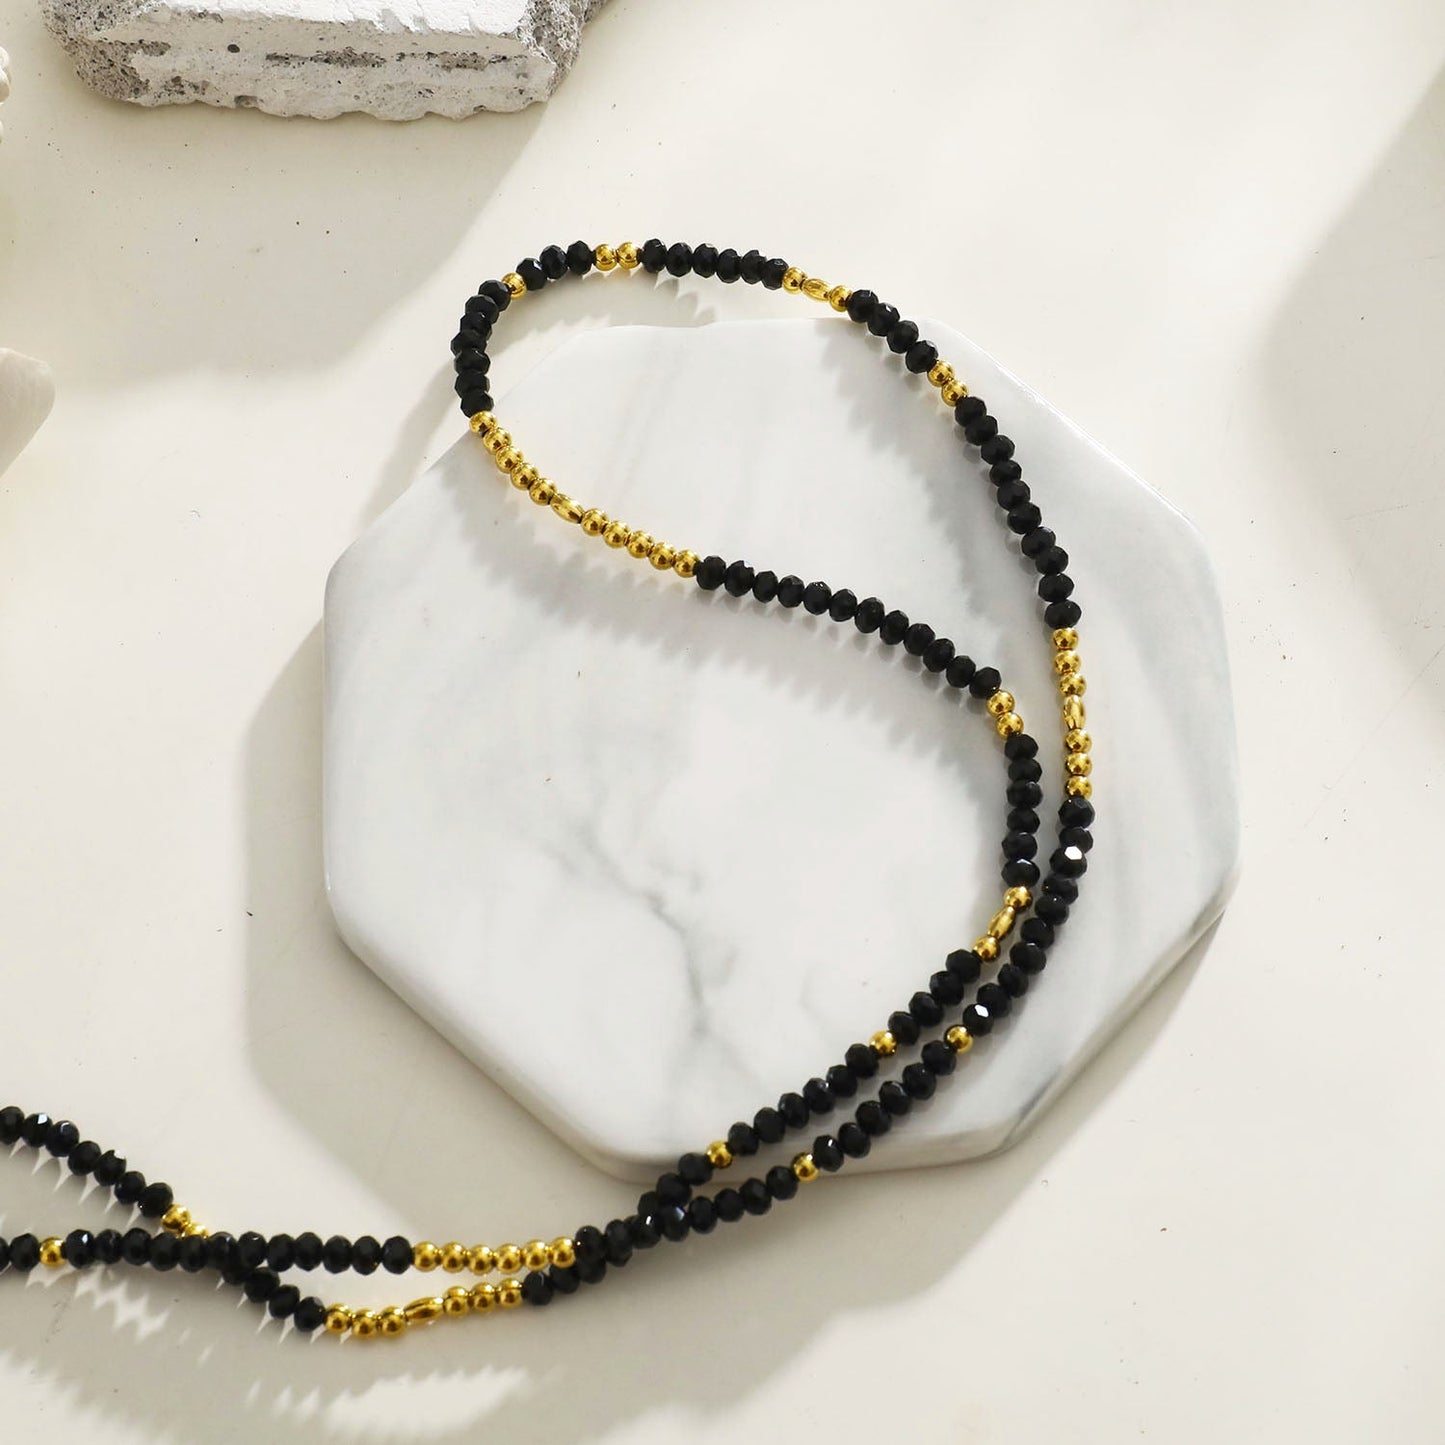 LINA Black Crystal and Gold Beads Chain Necklace